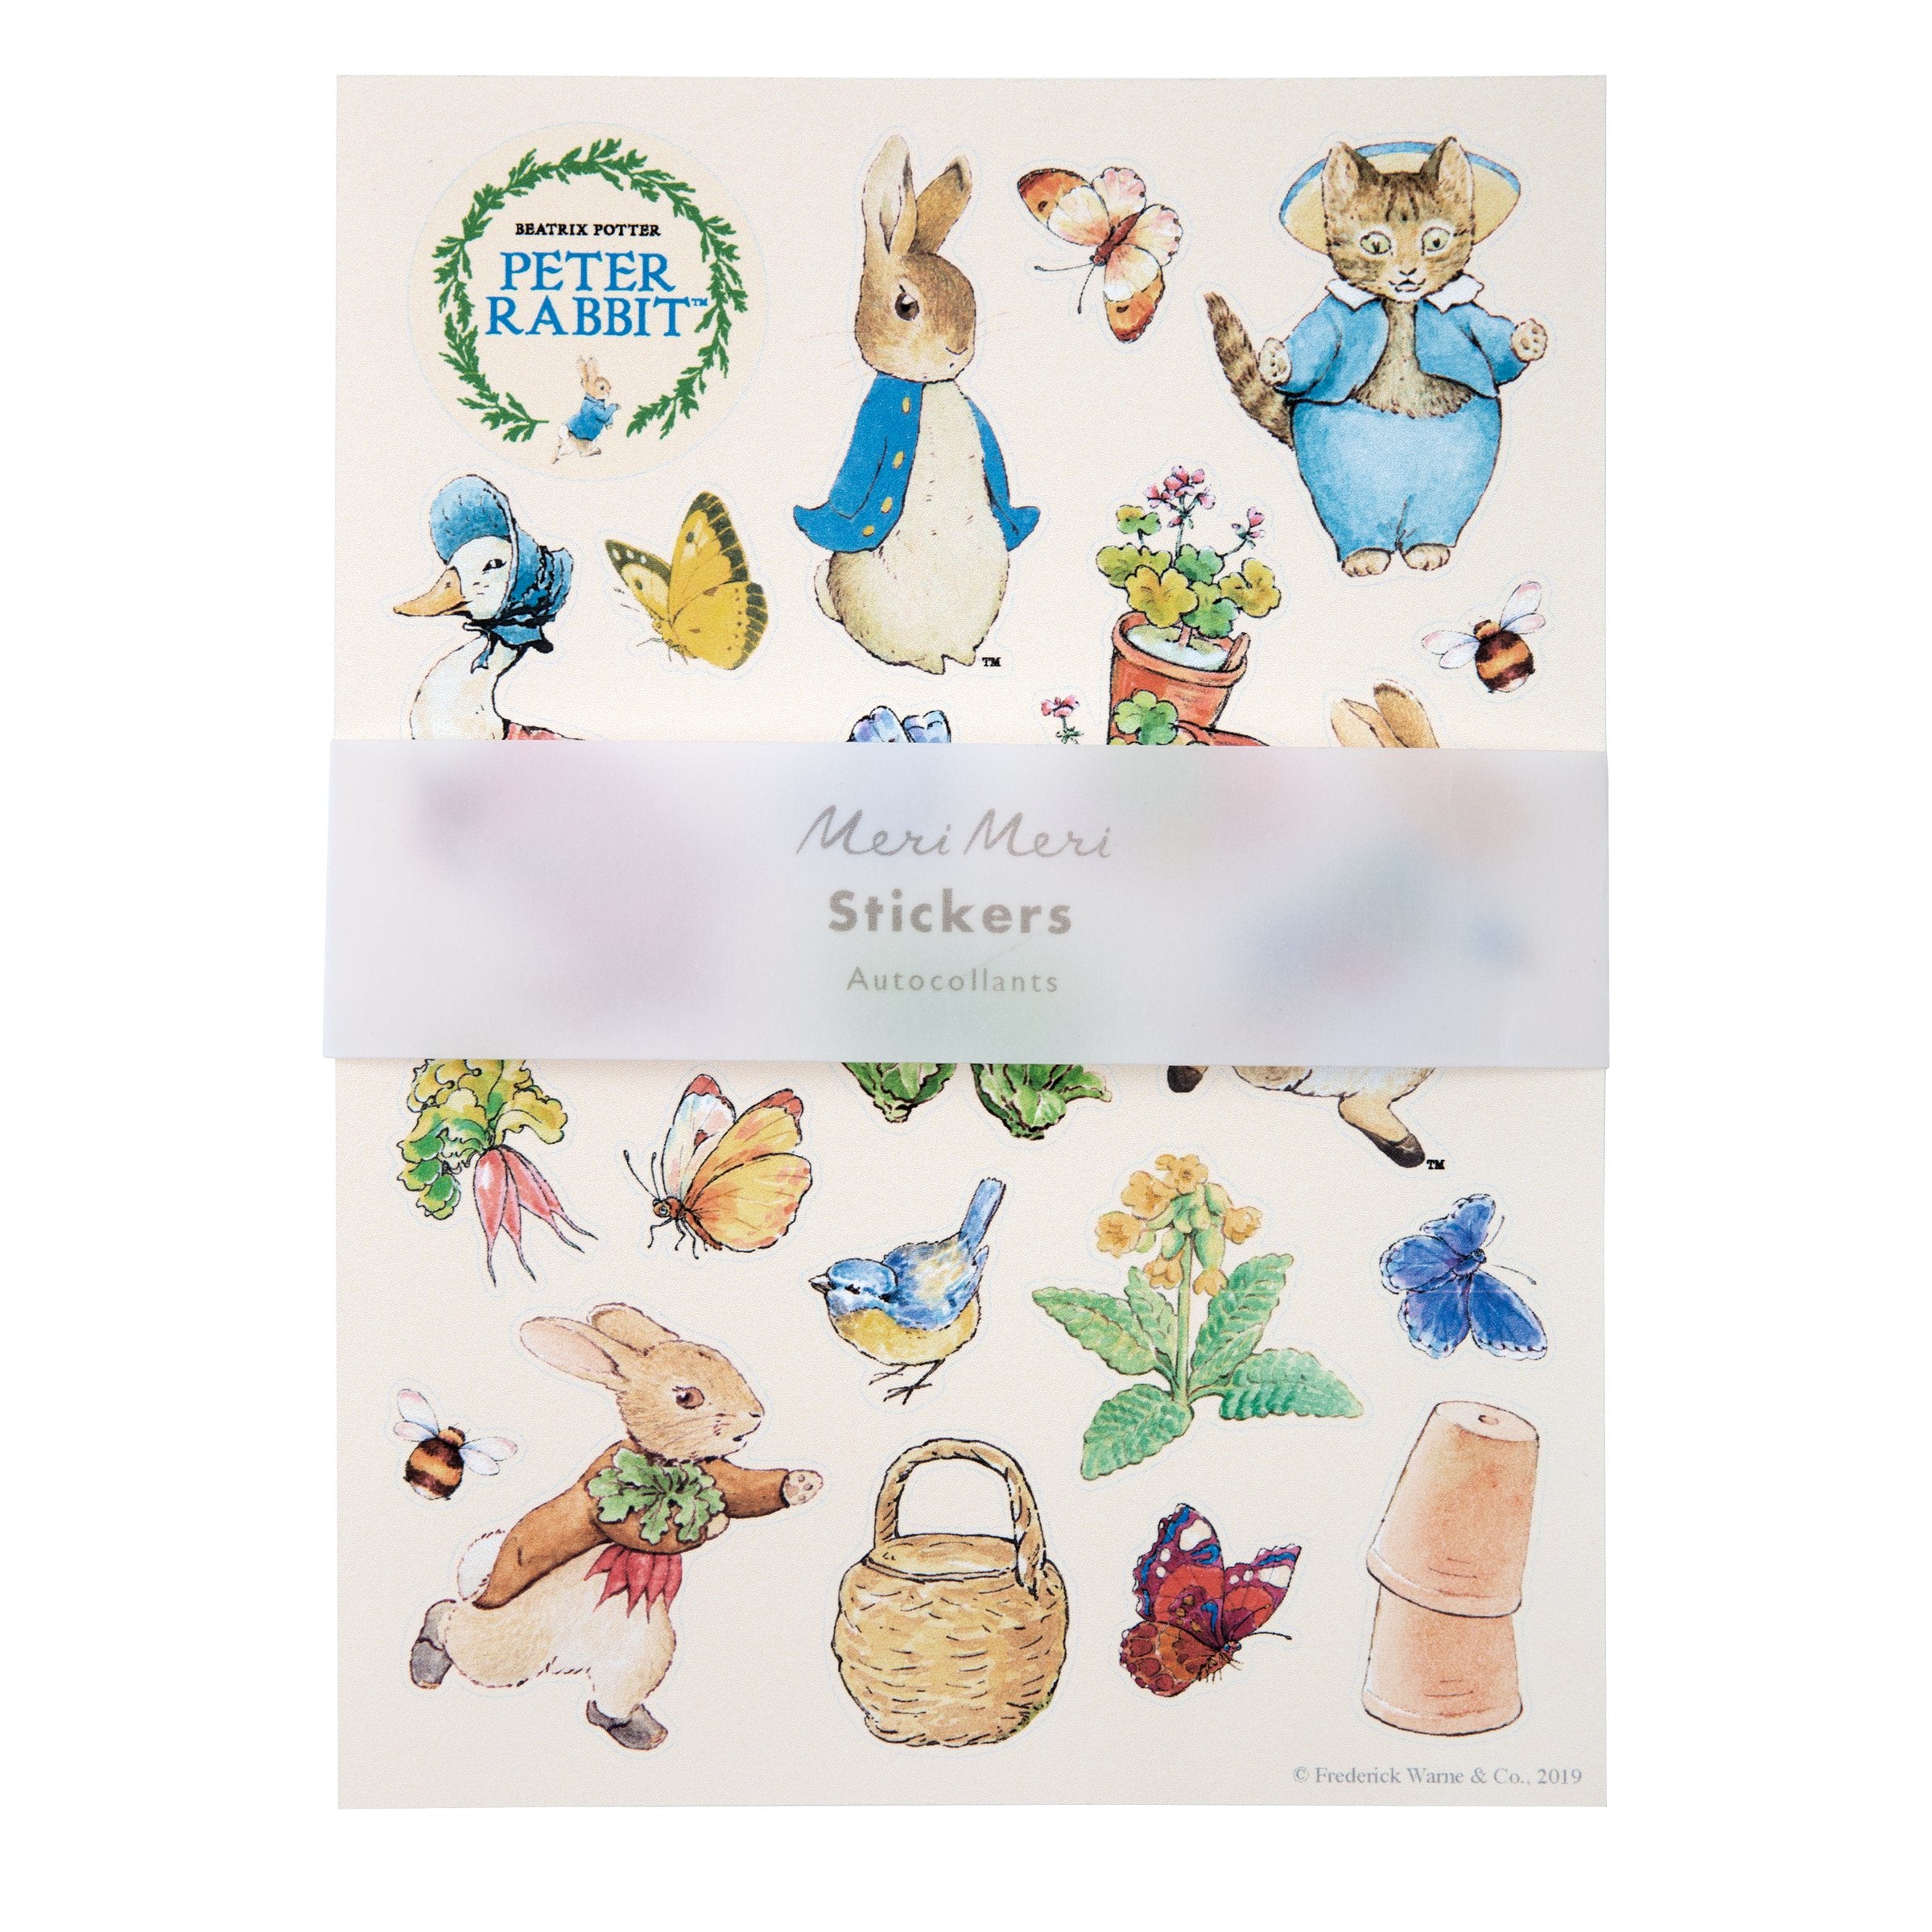 This delightful pack of Peter Rabbit characters' stickers are an excellent gift for kids who love craft activities.